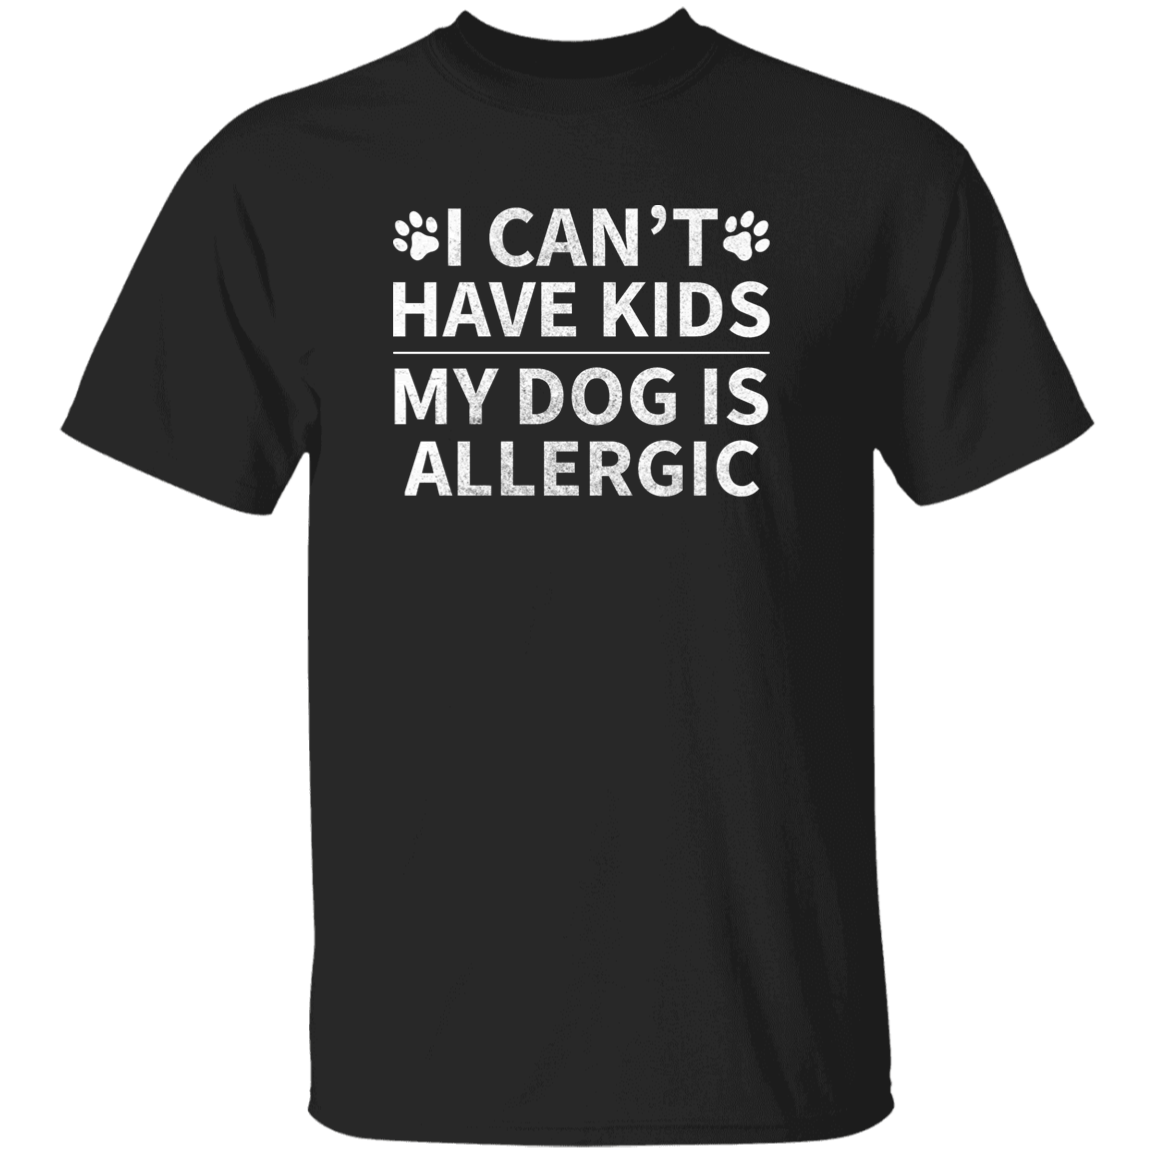 My Dog Is Allergic - T Shirt.